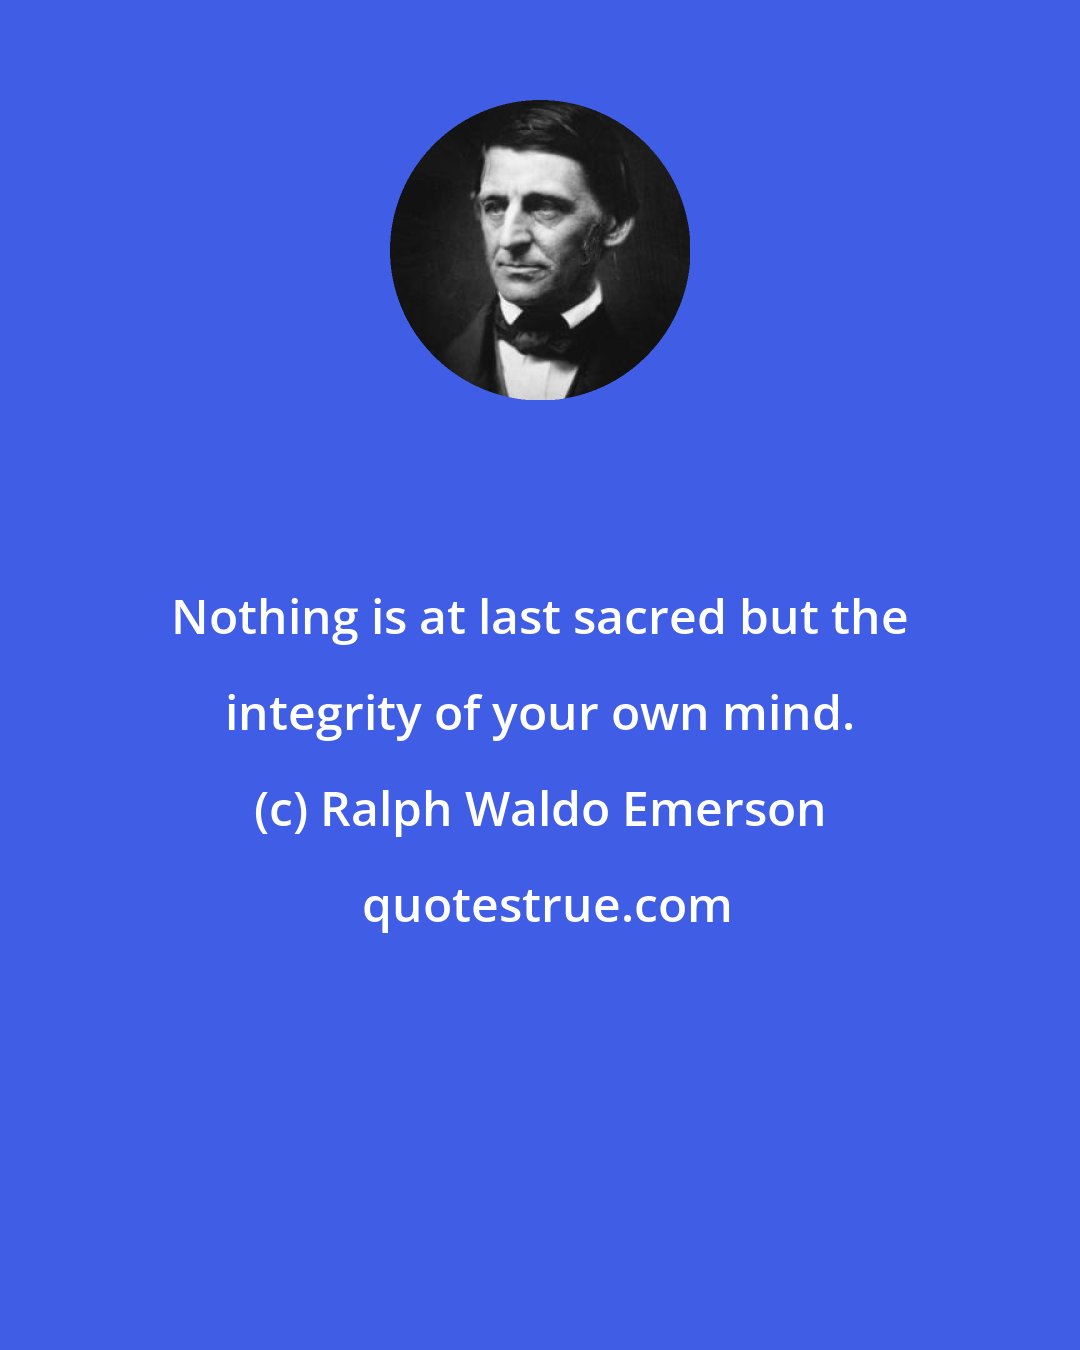 Ralph Waldo Emerson: Nothing is at last sacred but the integrity of your own mind.